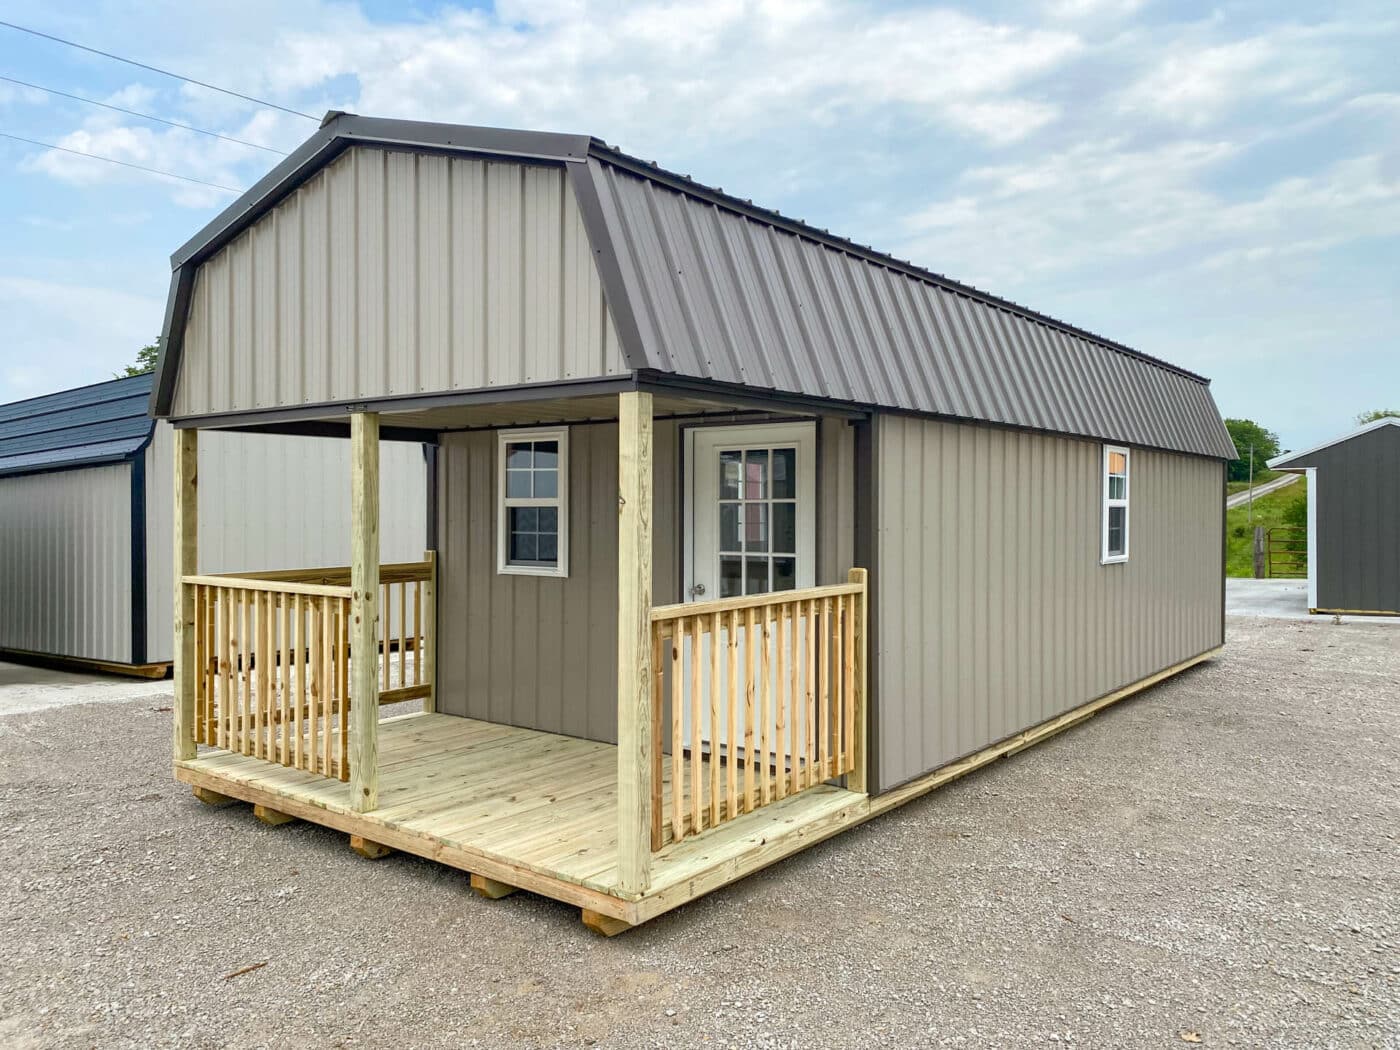 highwall lofted cabin built by Premier Barns in Missouri